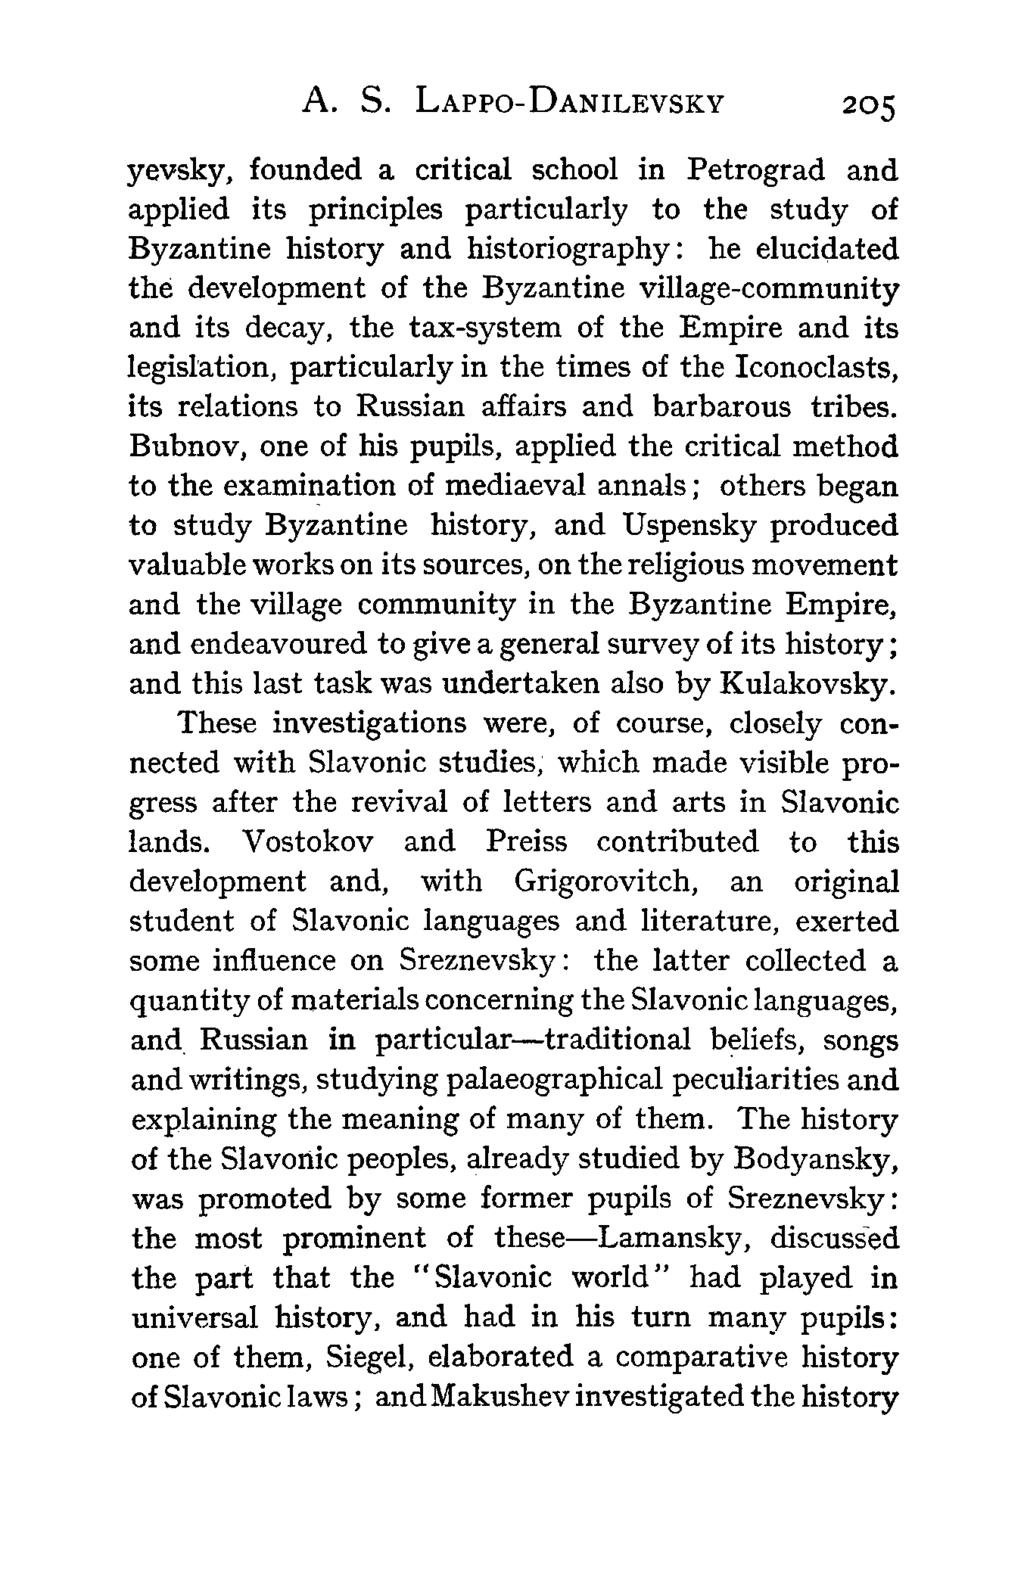 A. S. LAPPO-DANILEVSKY 205 yevsky, founded a critical school in Petrograd and applied its principles particularly to the study of Byzantine history and historiography: he elucidated the development